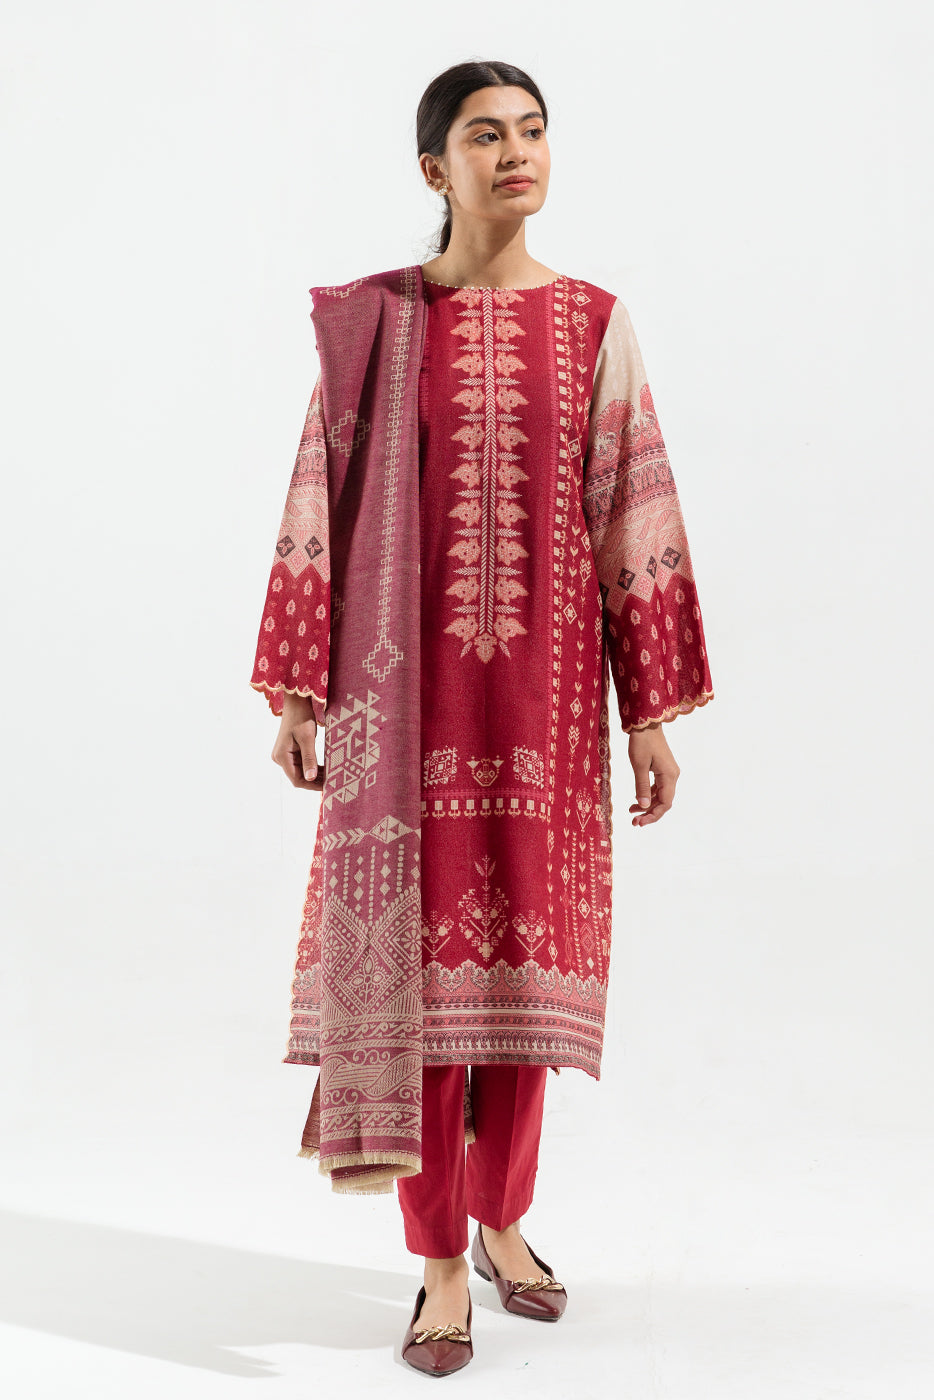 3 PIECE - PRINTED WITH SHAWL KHADDAR SUIT - MONOTONE PUNCH (UNSTITCHED) - BEECHTREE